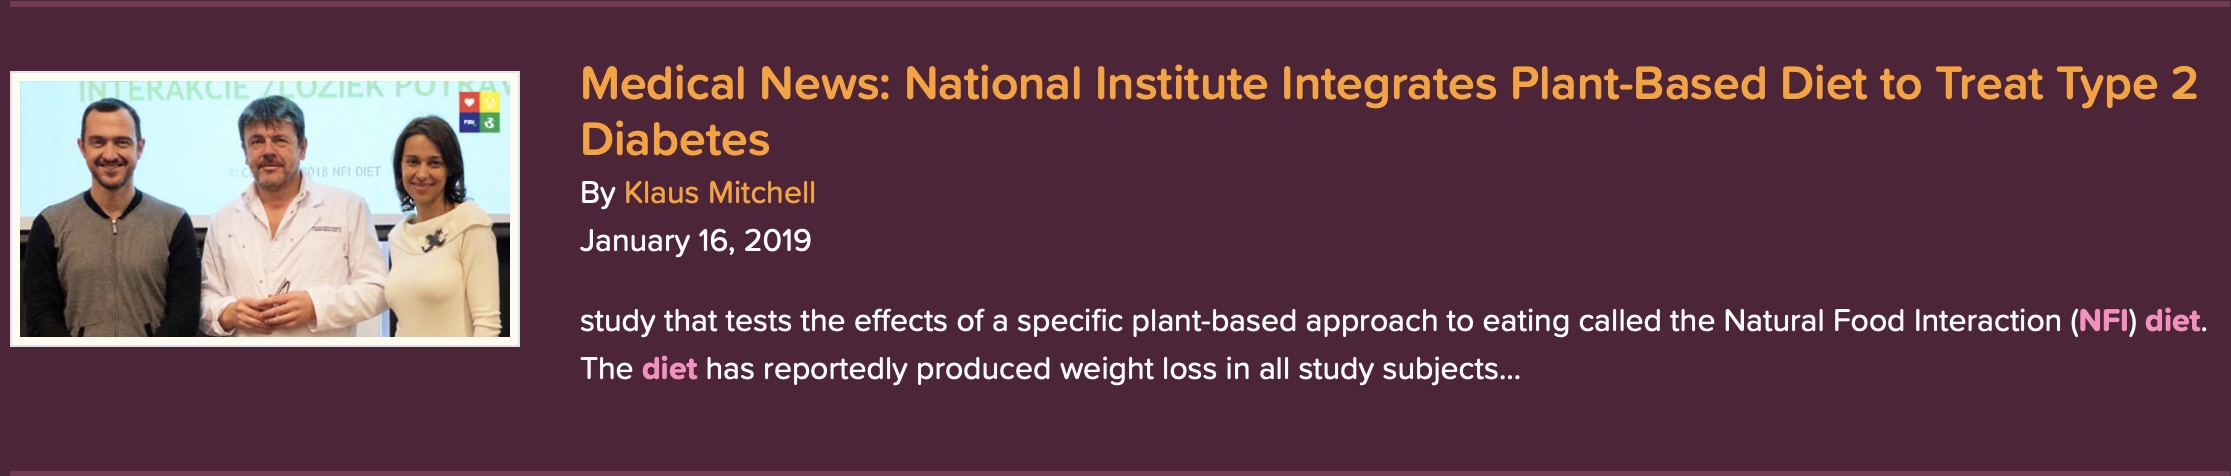 Medical News: National Institute Integrates Plant-Based Diet to Treat Type 2 Diabetes